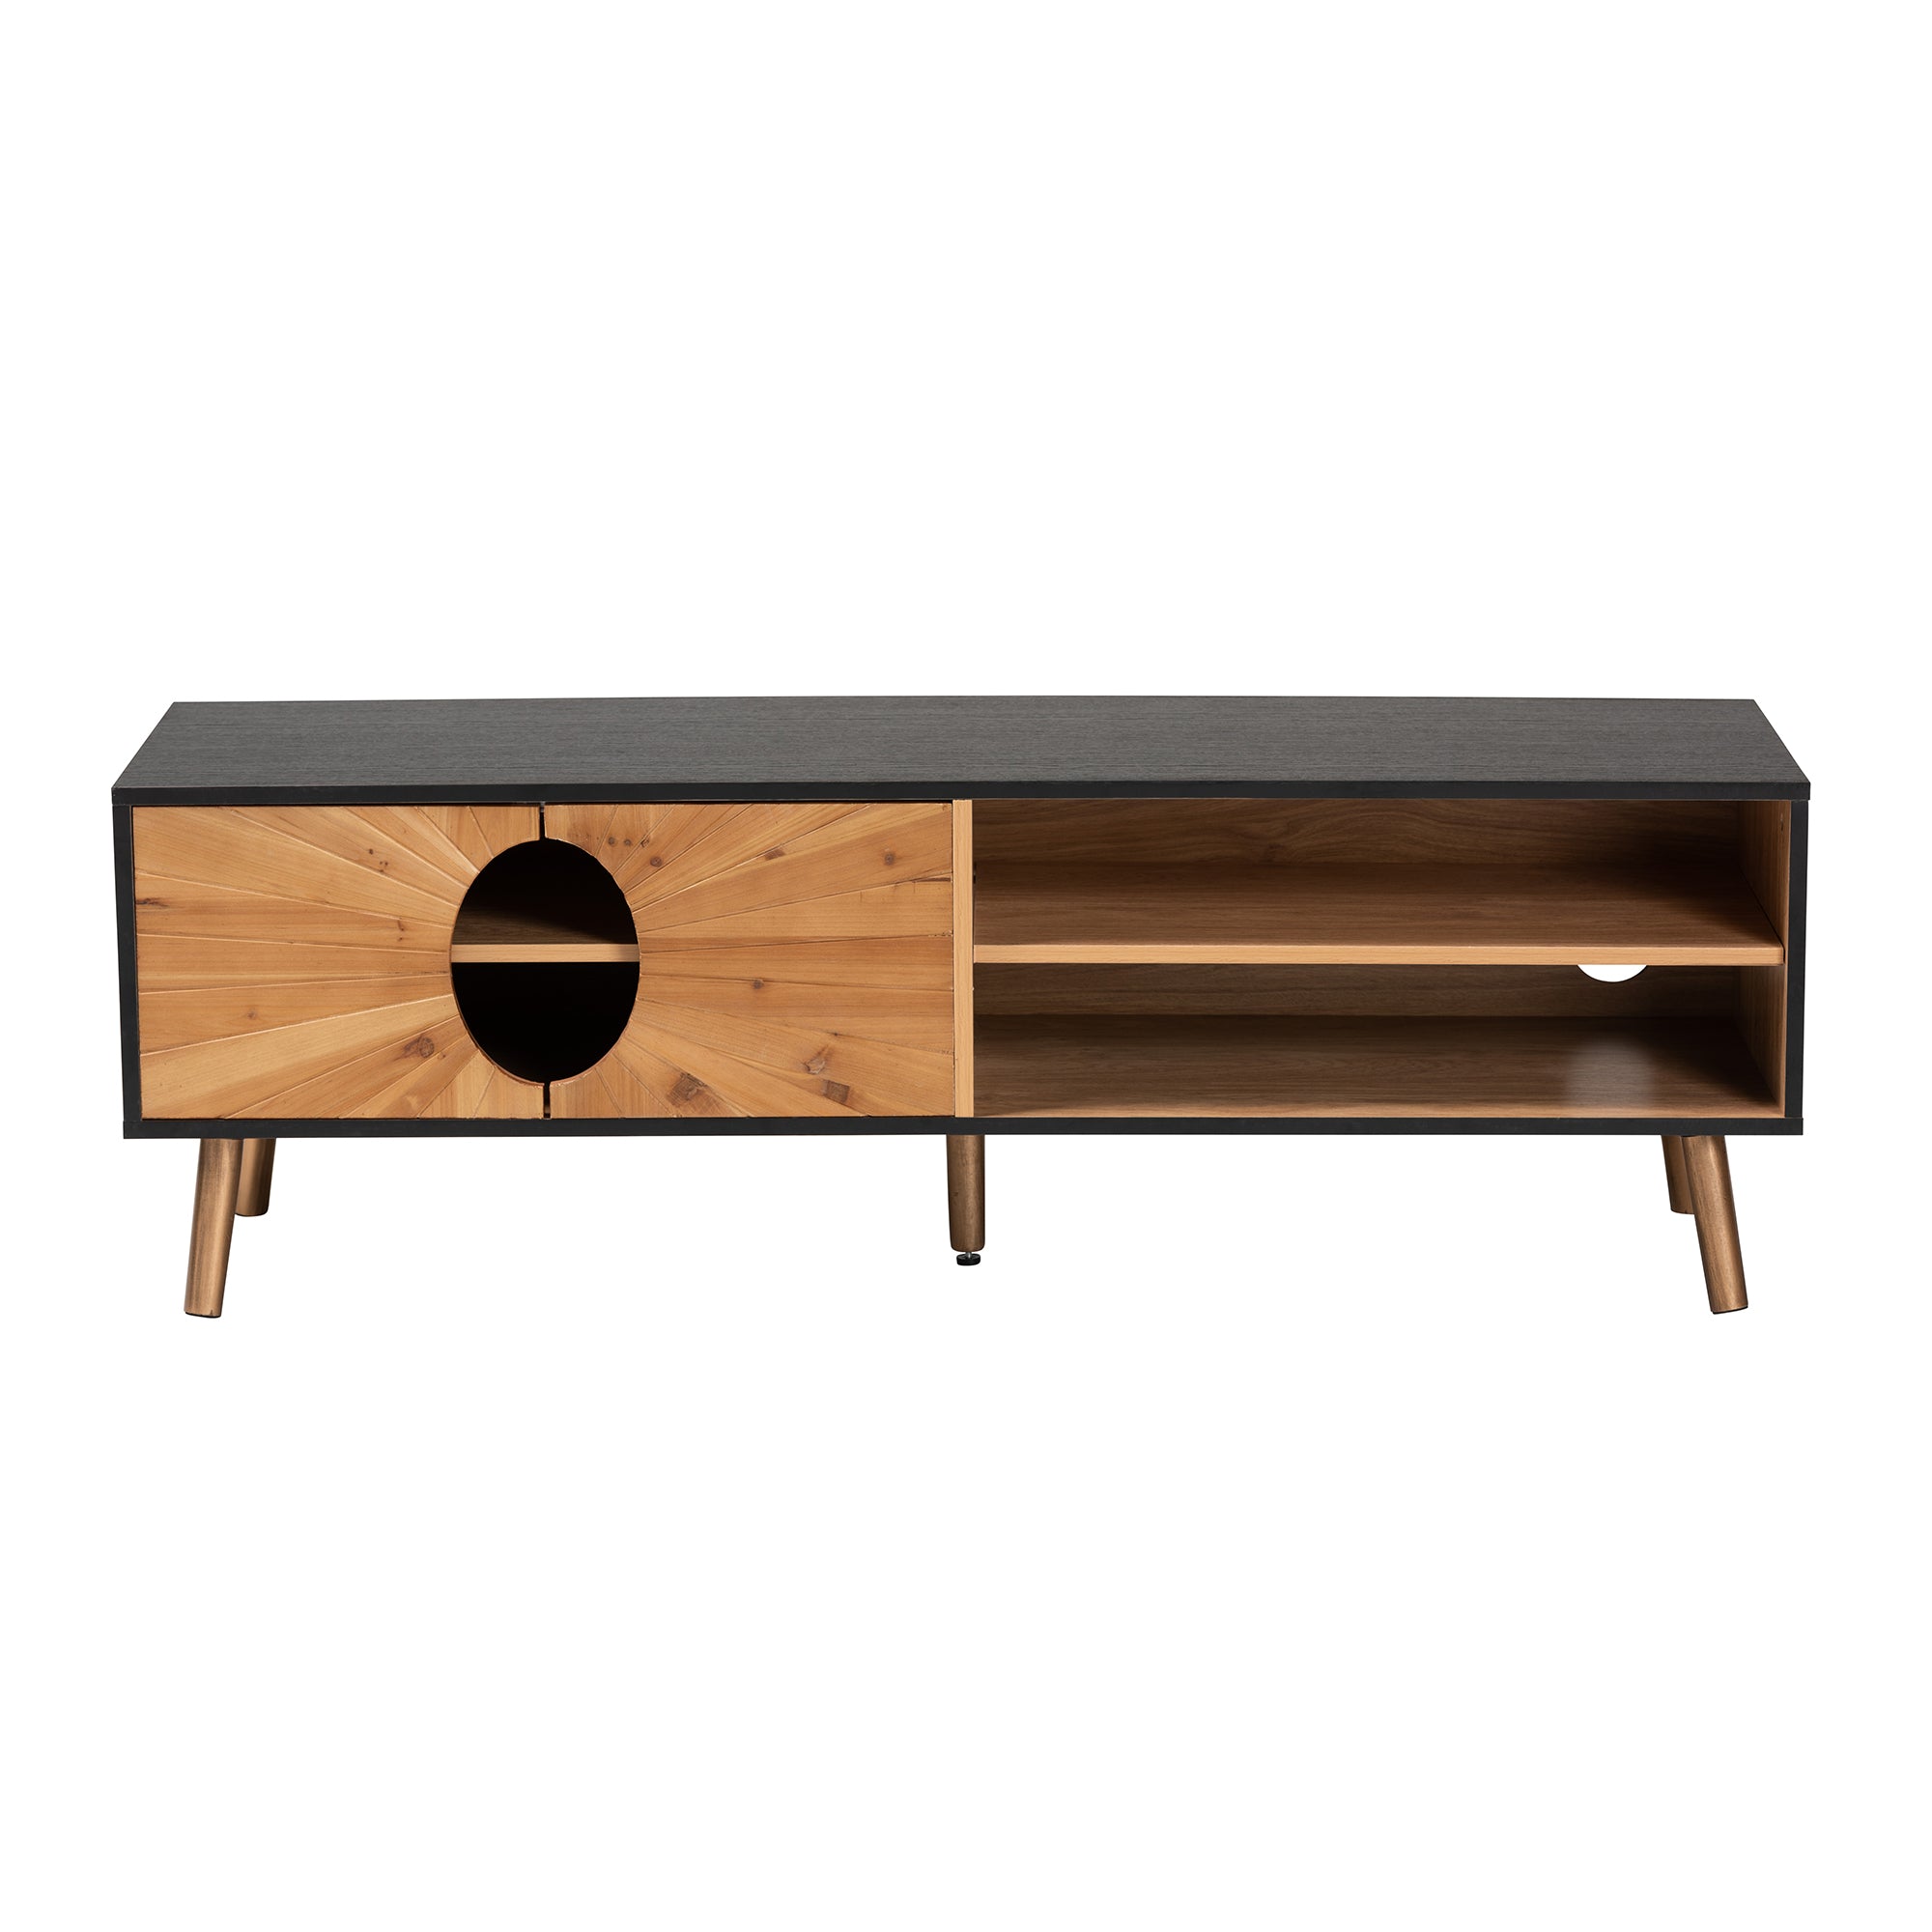 Chester Modern TV Stand Two-Tone-TV Stand-Baxton Studio - WI-Wall2Wall Furnishings